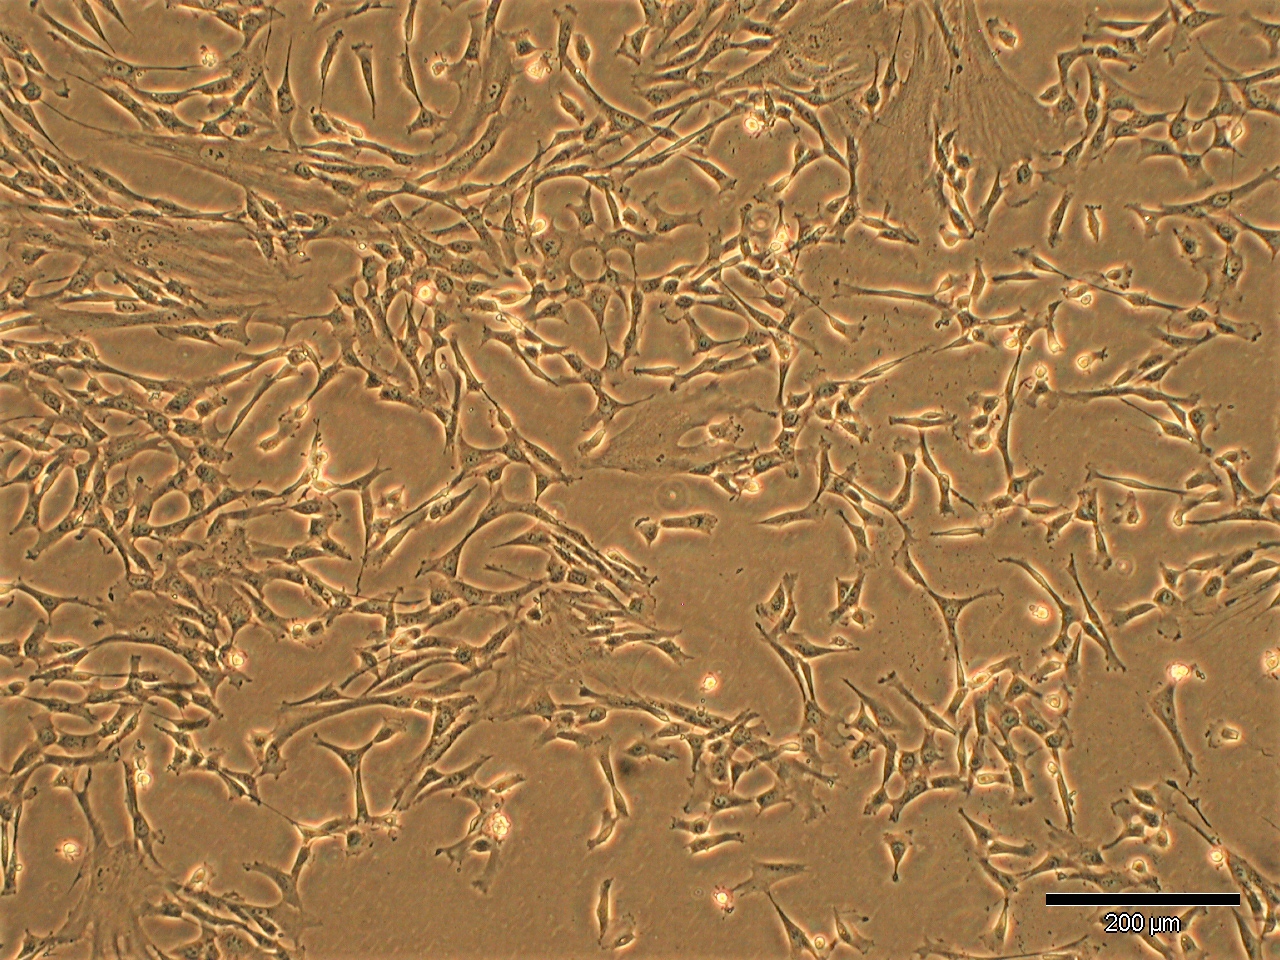 A microscopic image of the cultured human mesenchymal stem cells from the donor umbilical cord, whose stem cell products in conditioned medium were used for this therapeutic approach.